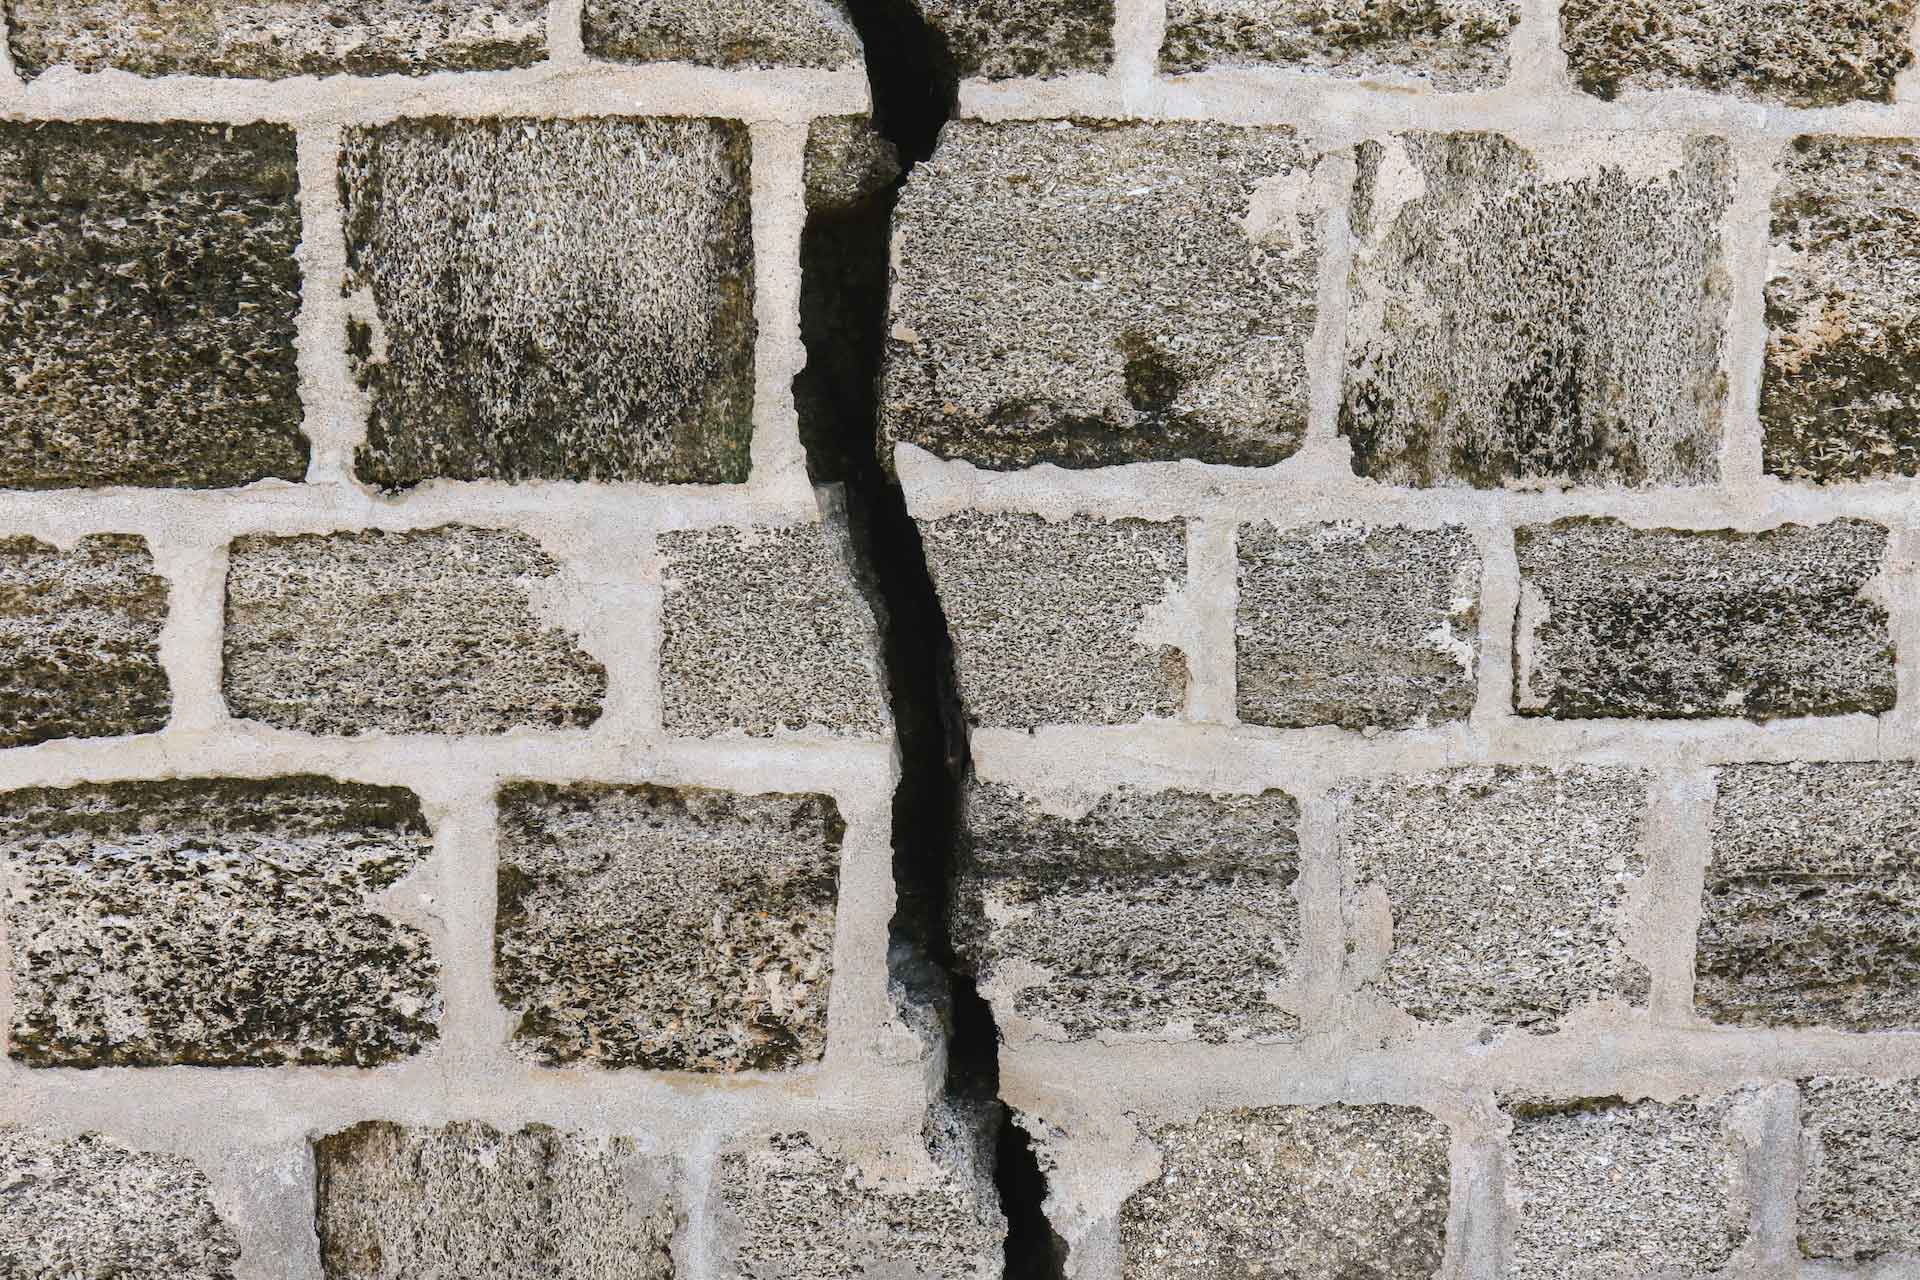 Cracked foundation wall